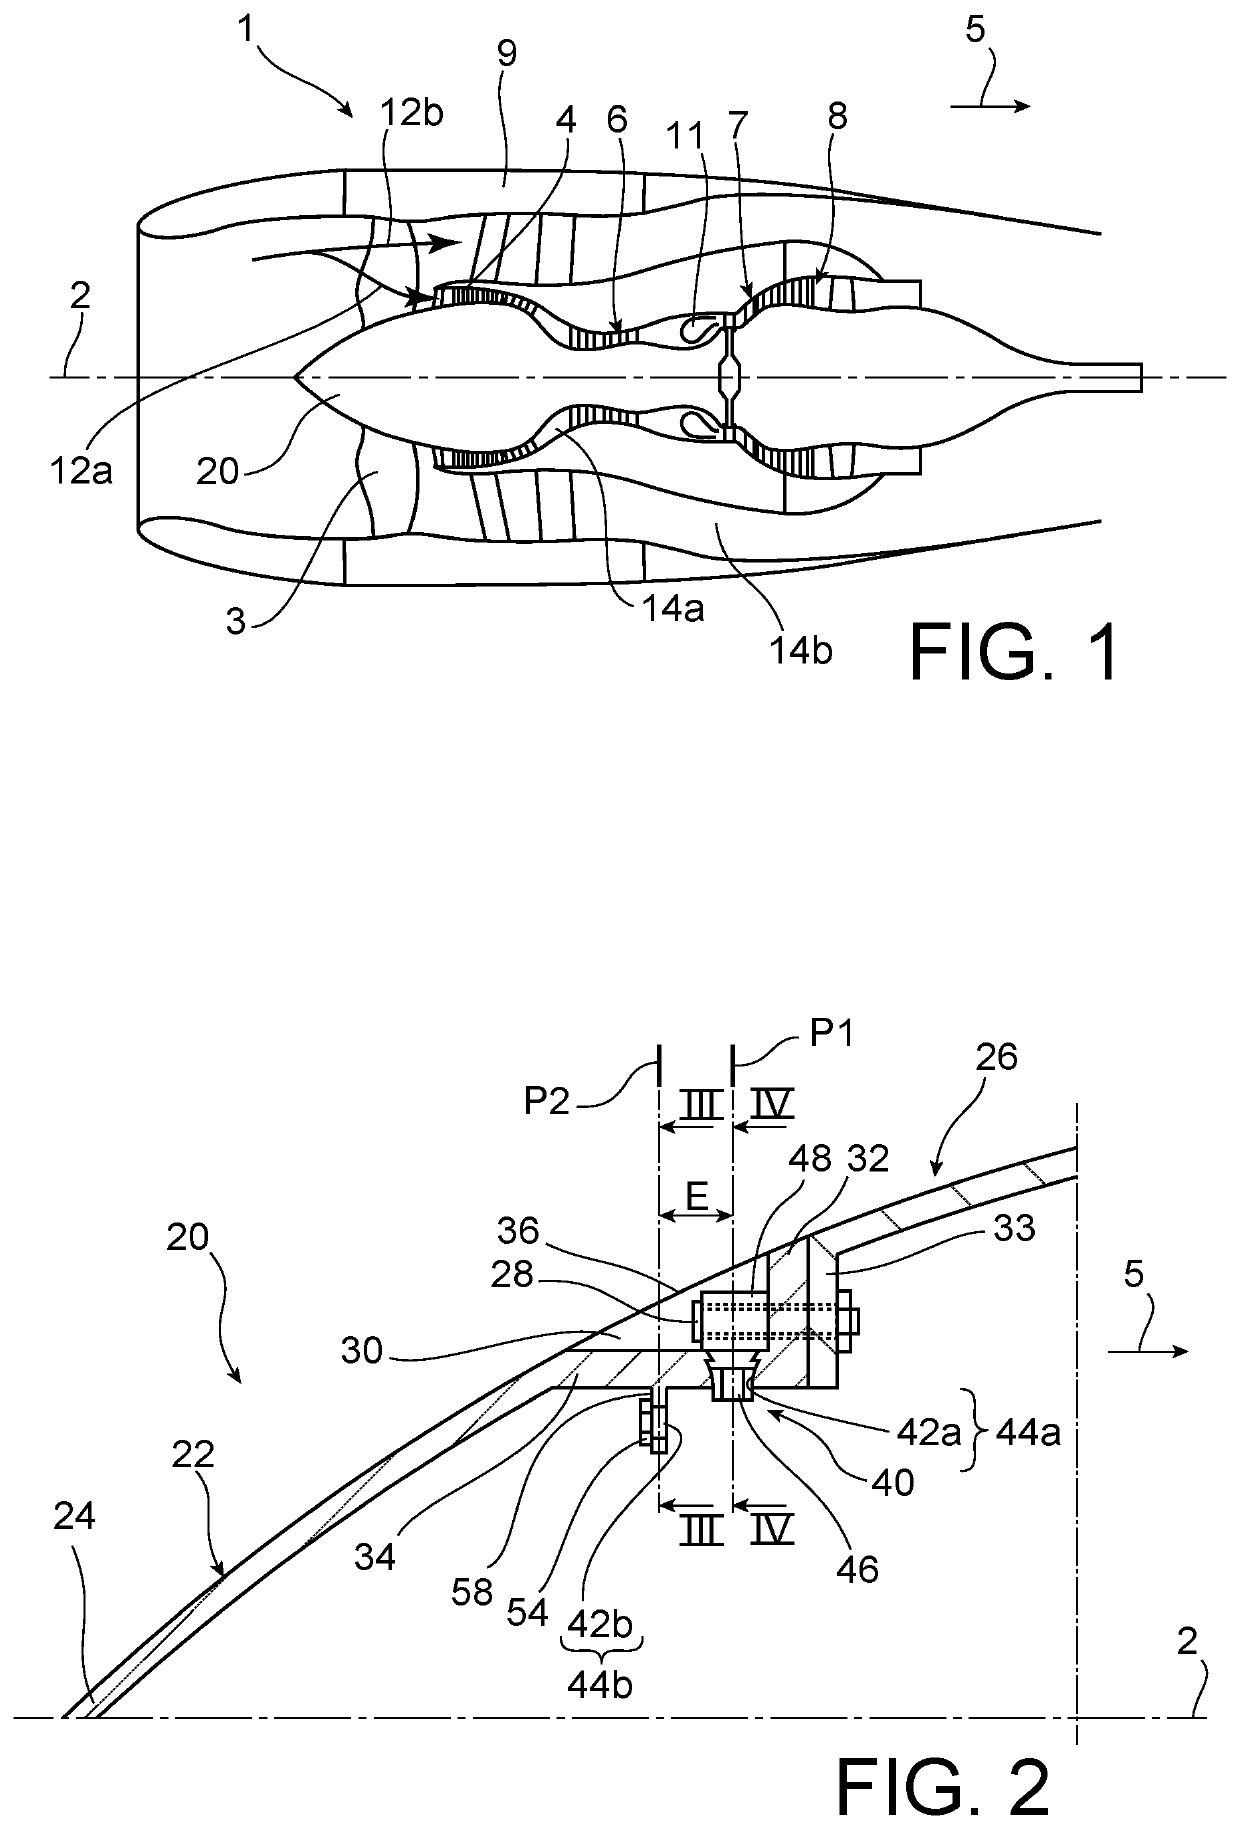 Balancing system for an aircraft turbomachine